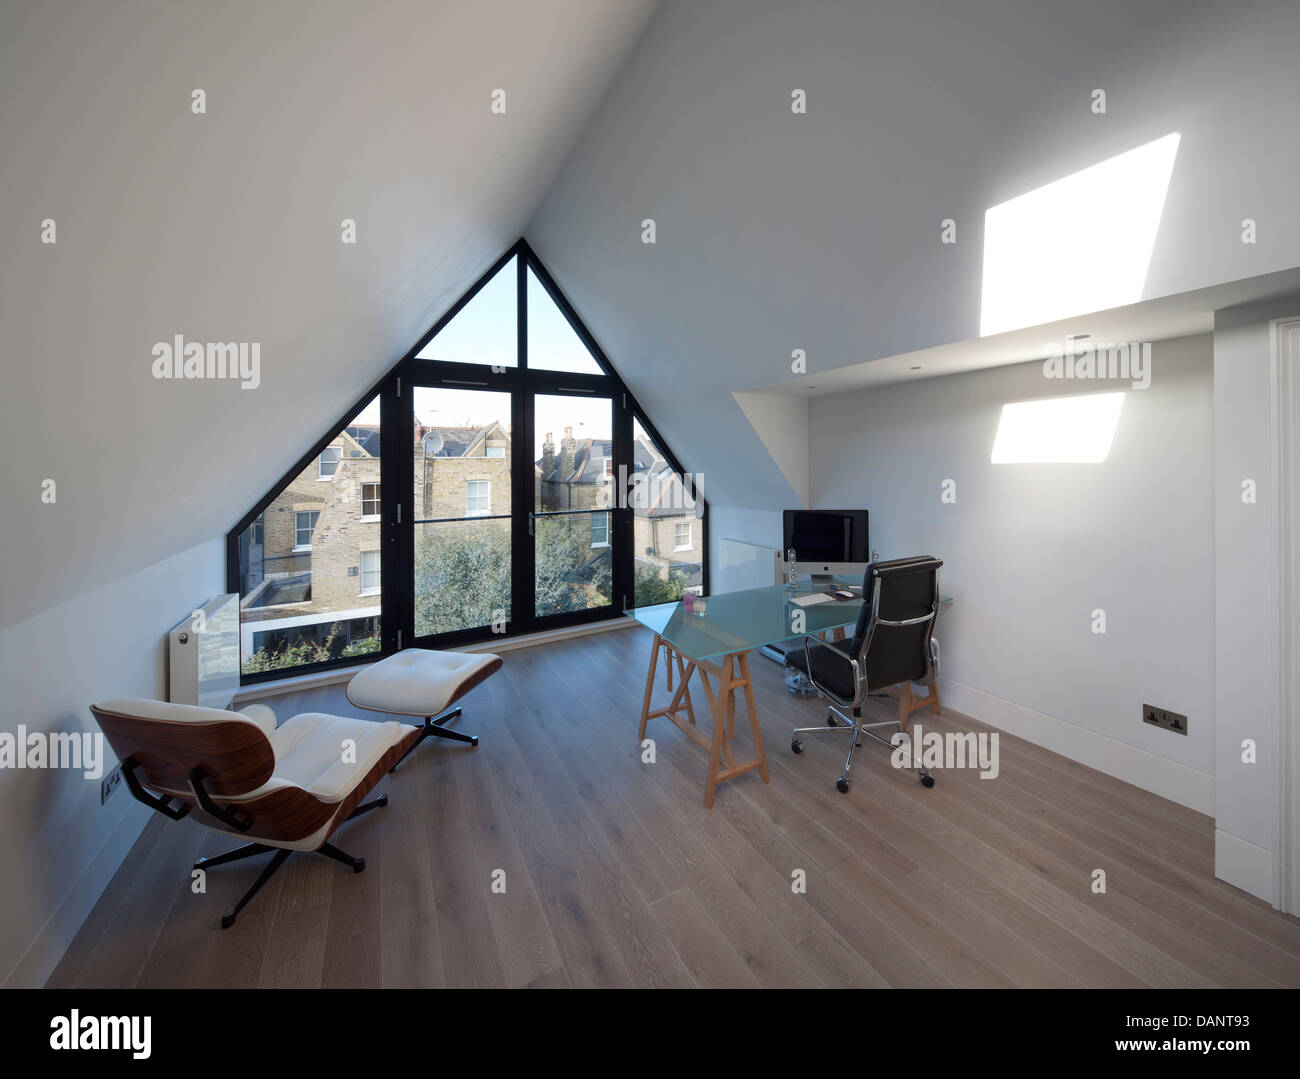 Dents Road, London, United Kingdom. Architect: h2 Architecture, 2012. Office loft conversion with view of neighbouring rooftops. Stock Photo